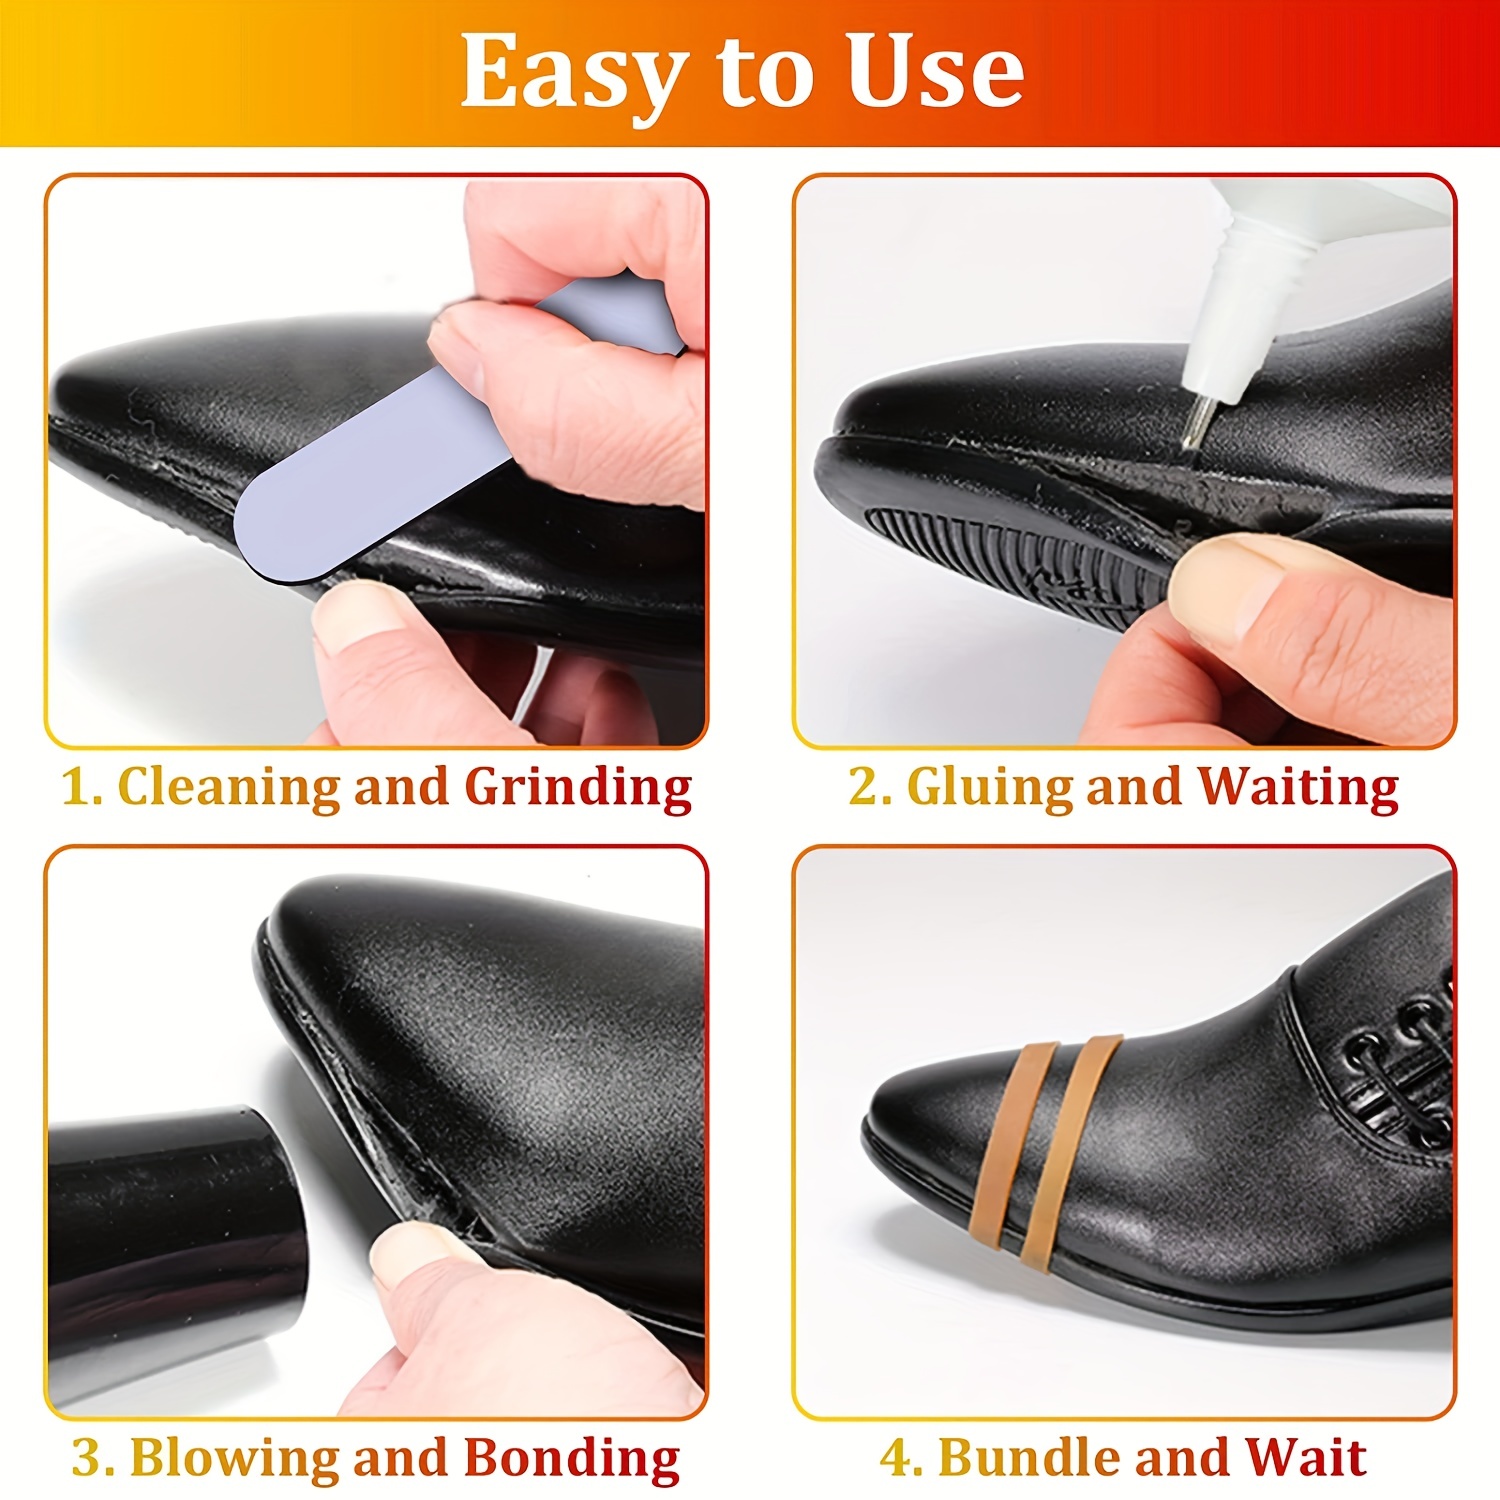 3 Pack Shoe Glue Repair Adhesive for Fixing Worn Shoes Boots